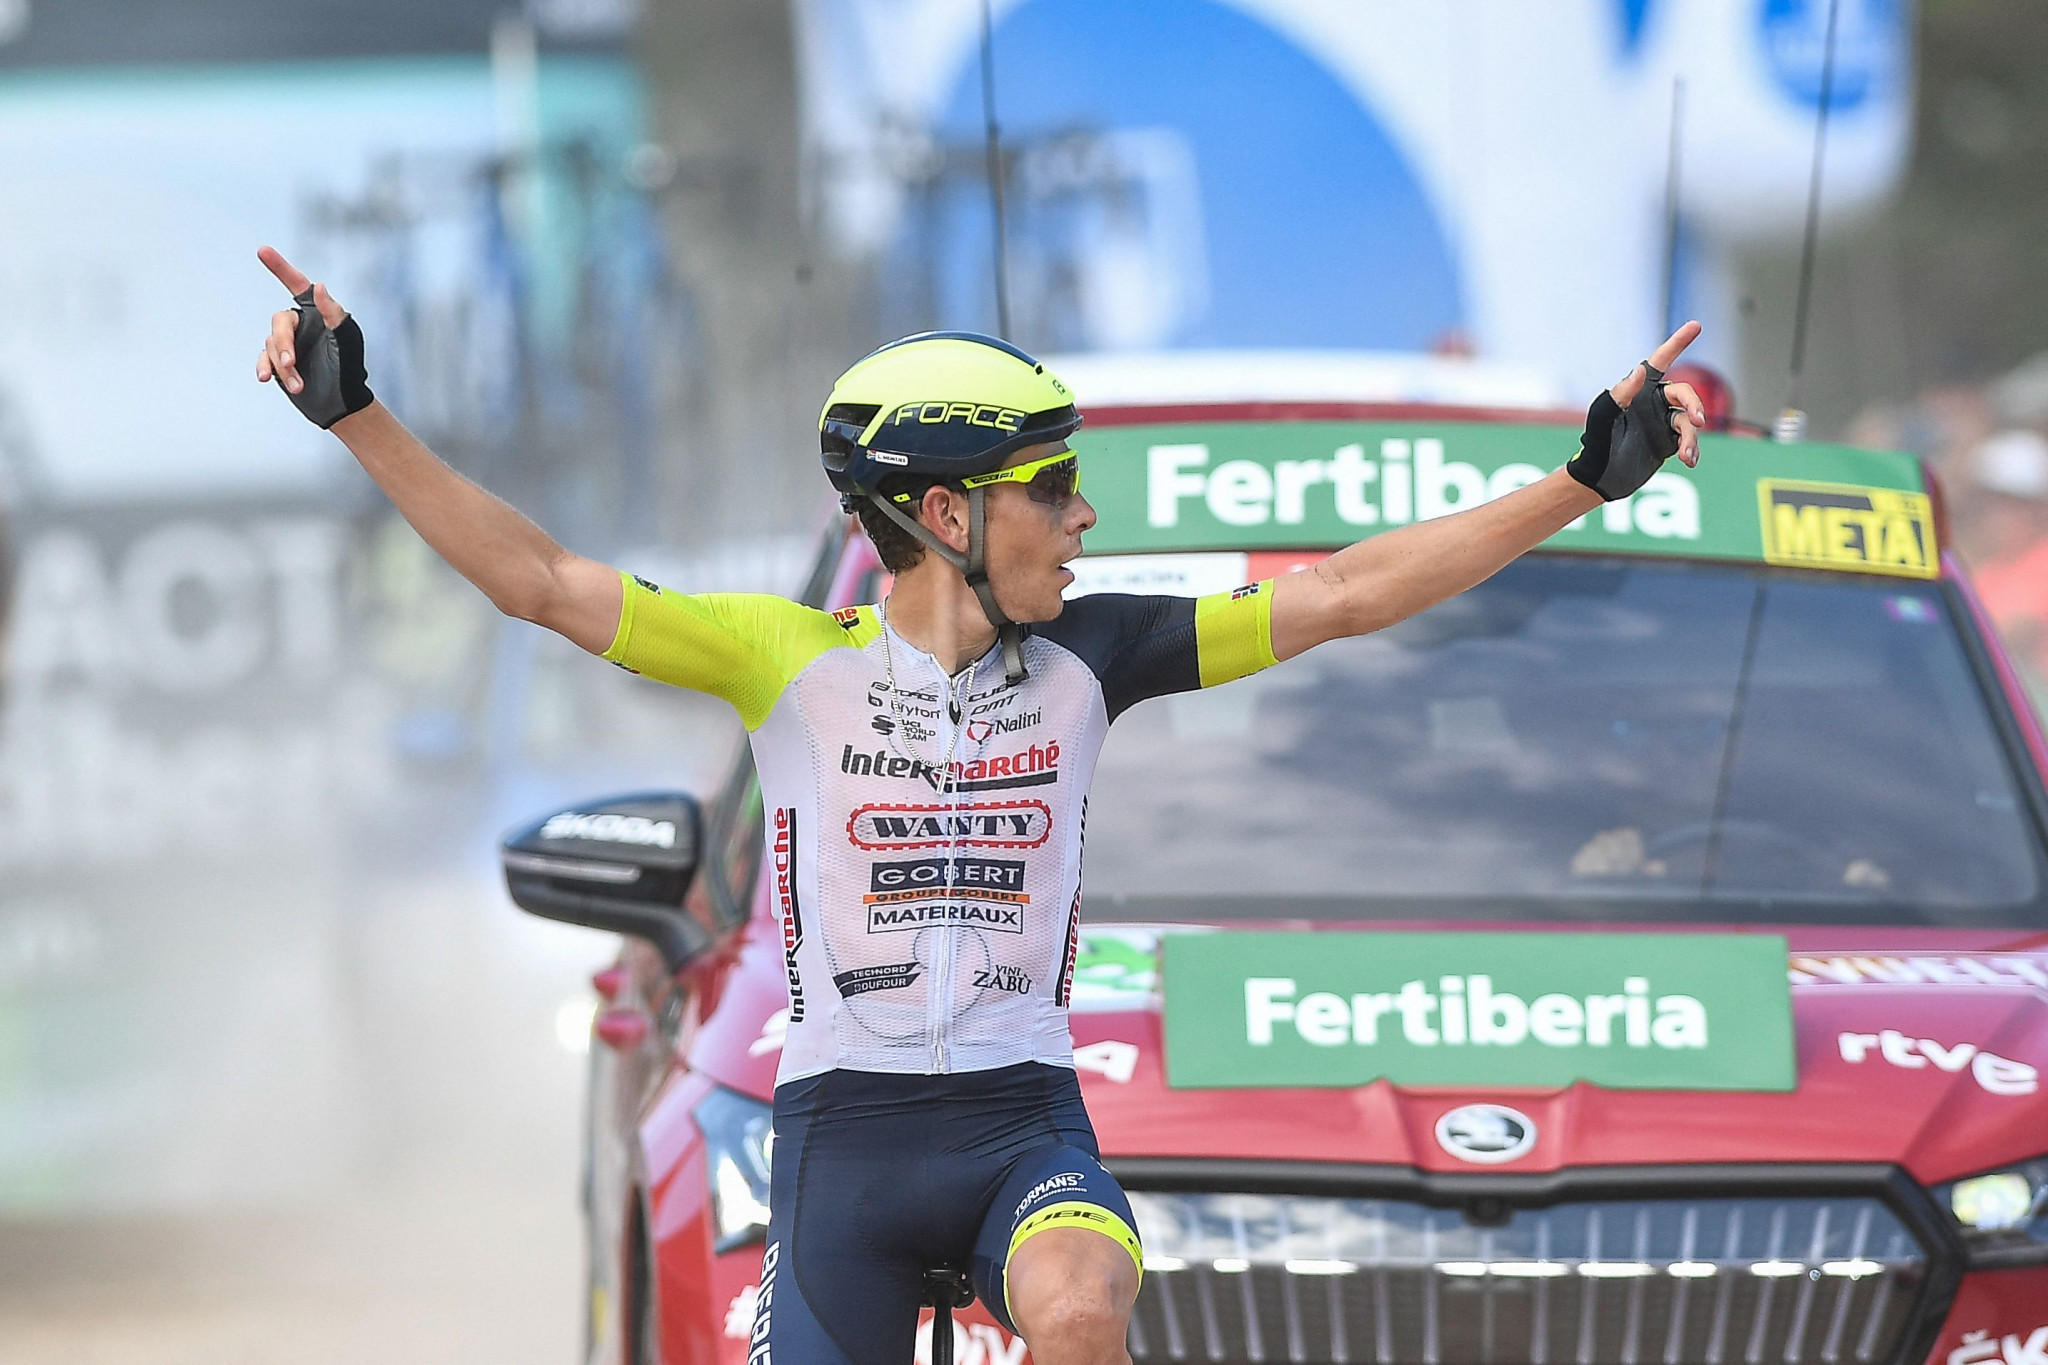 Louis Meintjes became the second South African to win a stage at the Vuelta a España ©Getty Images